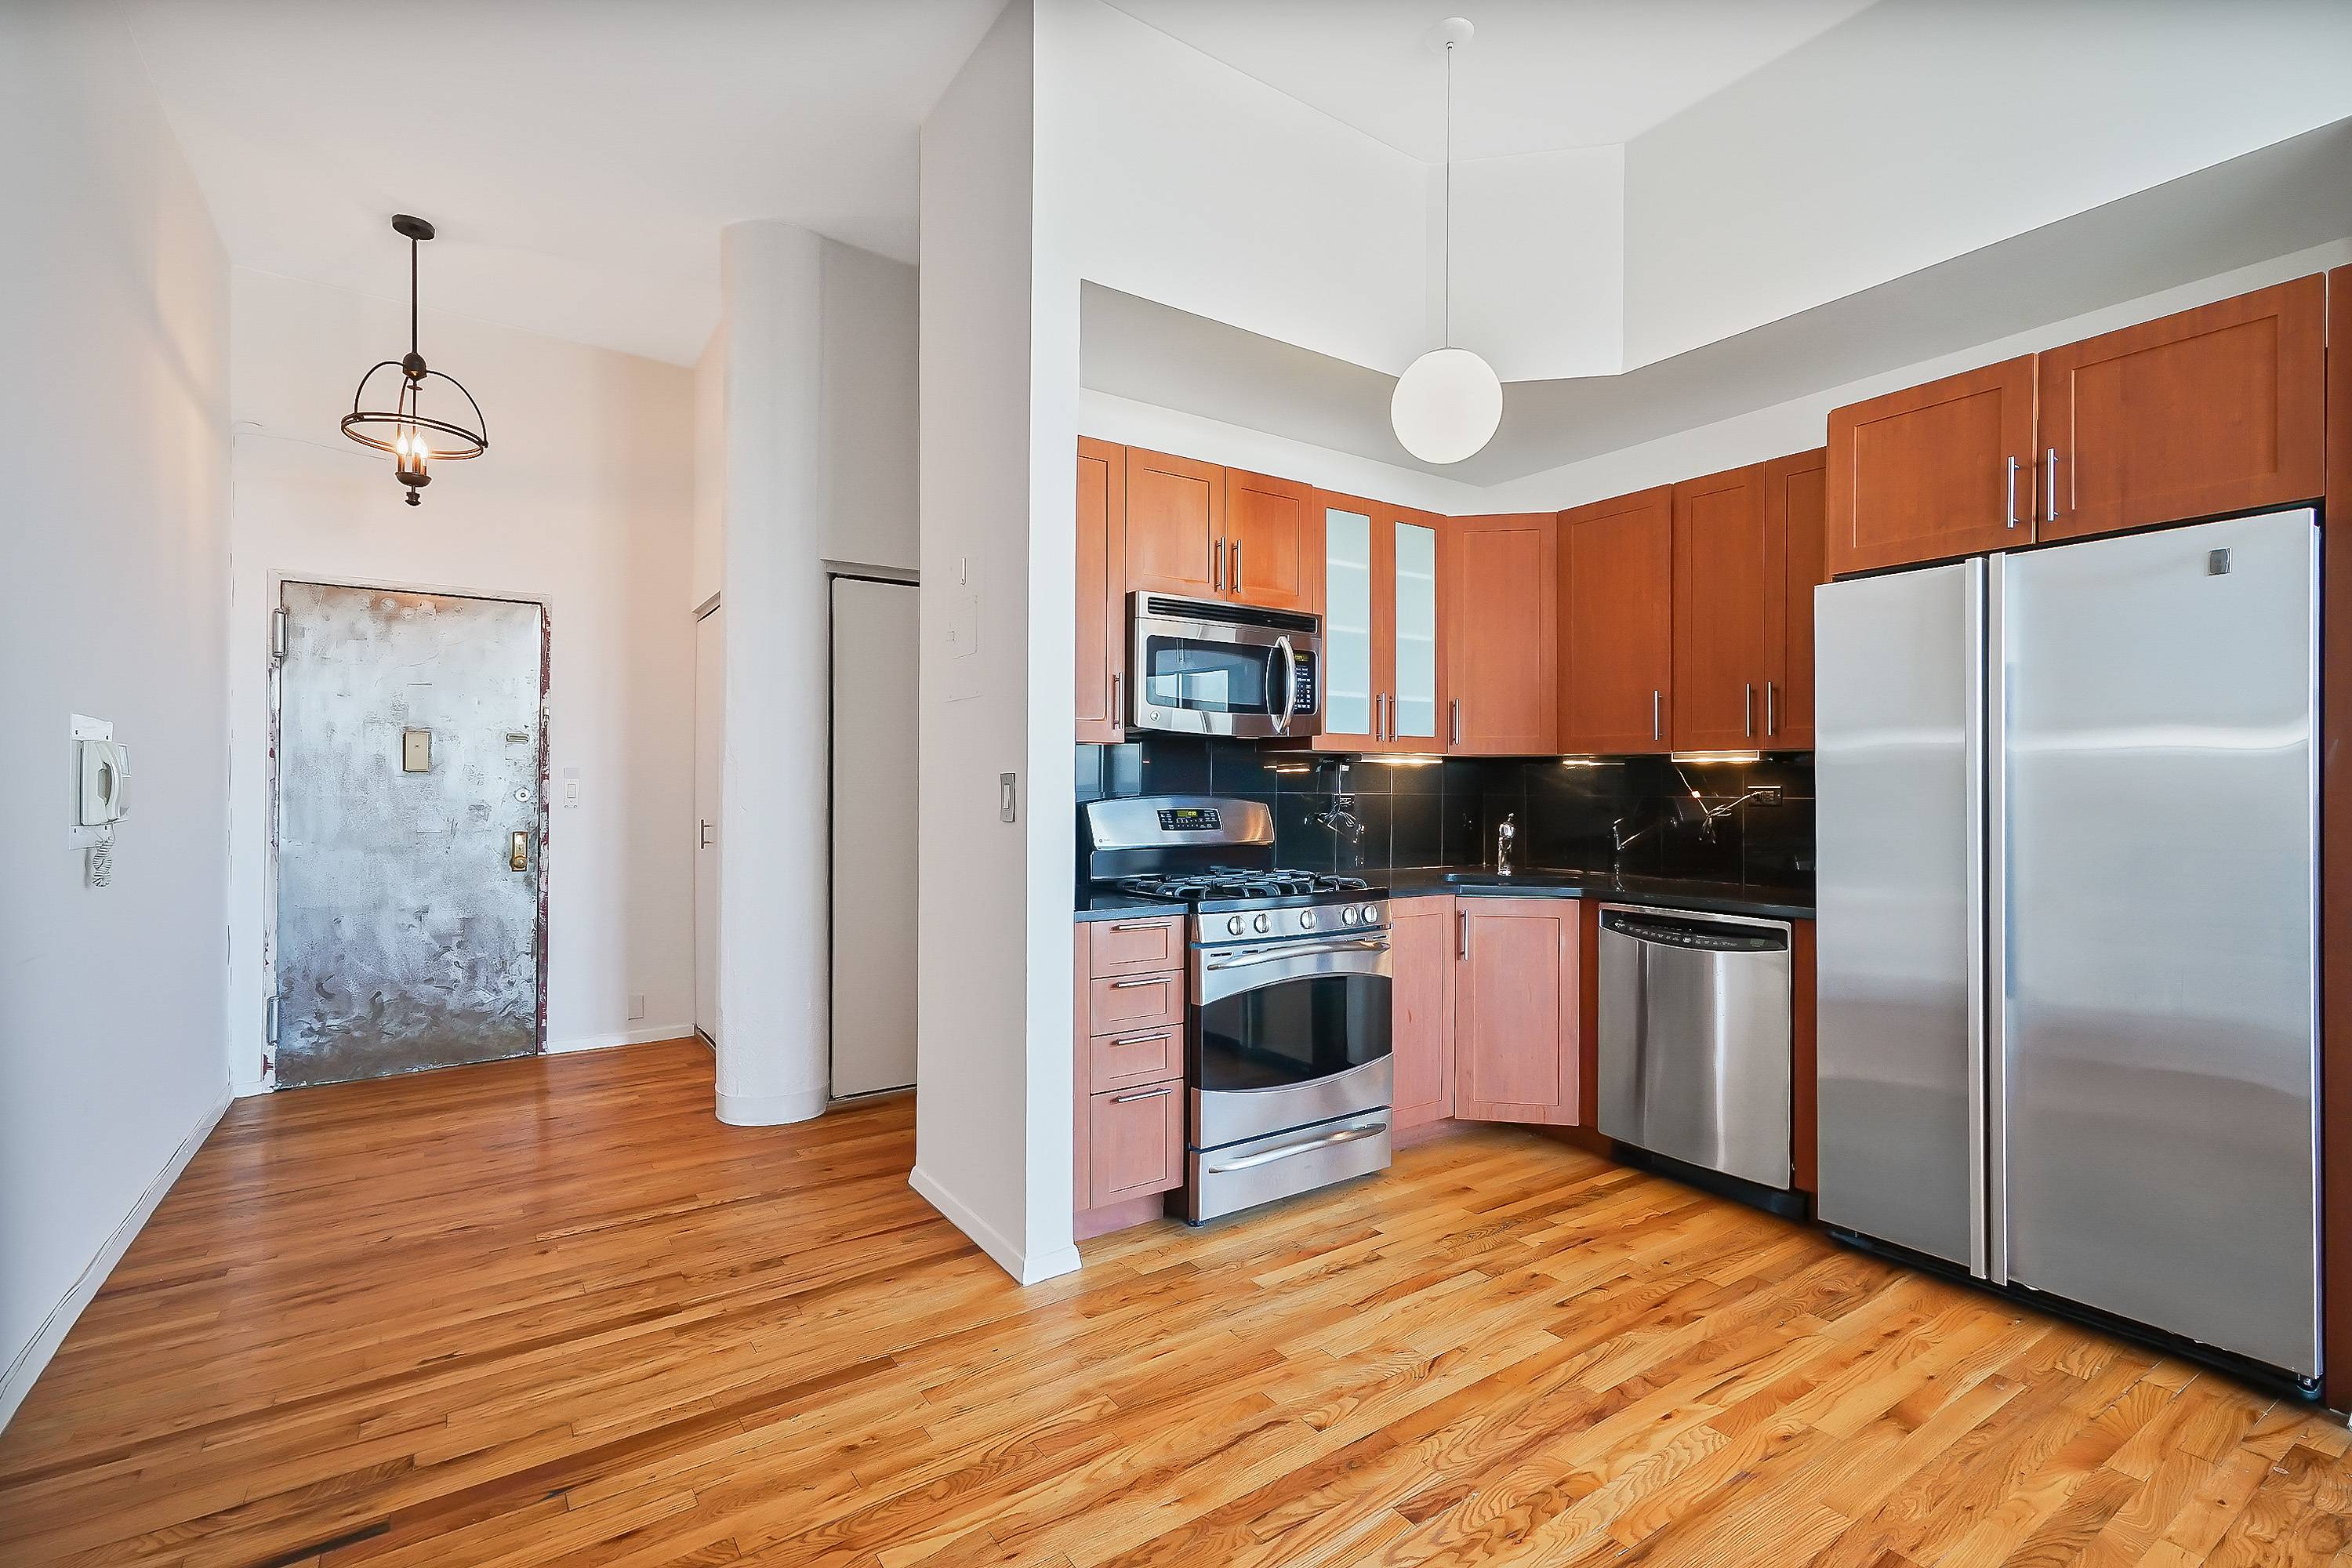 505 Court Street Lofts is the premiere full service building in Carroll Gardens.